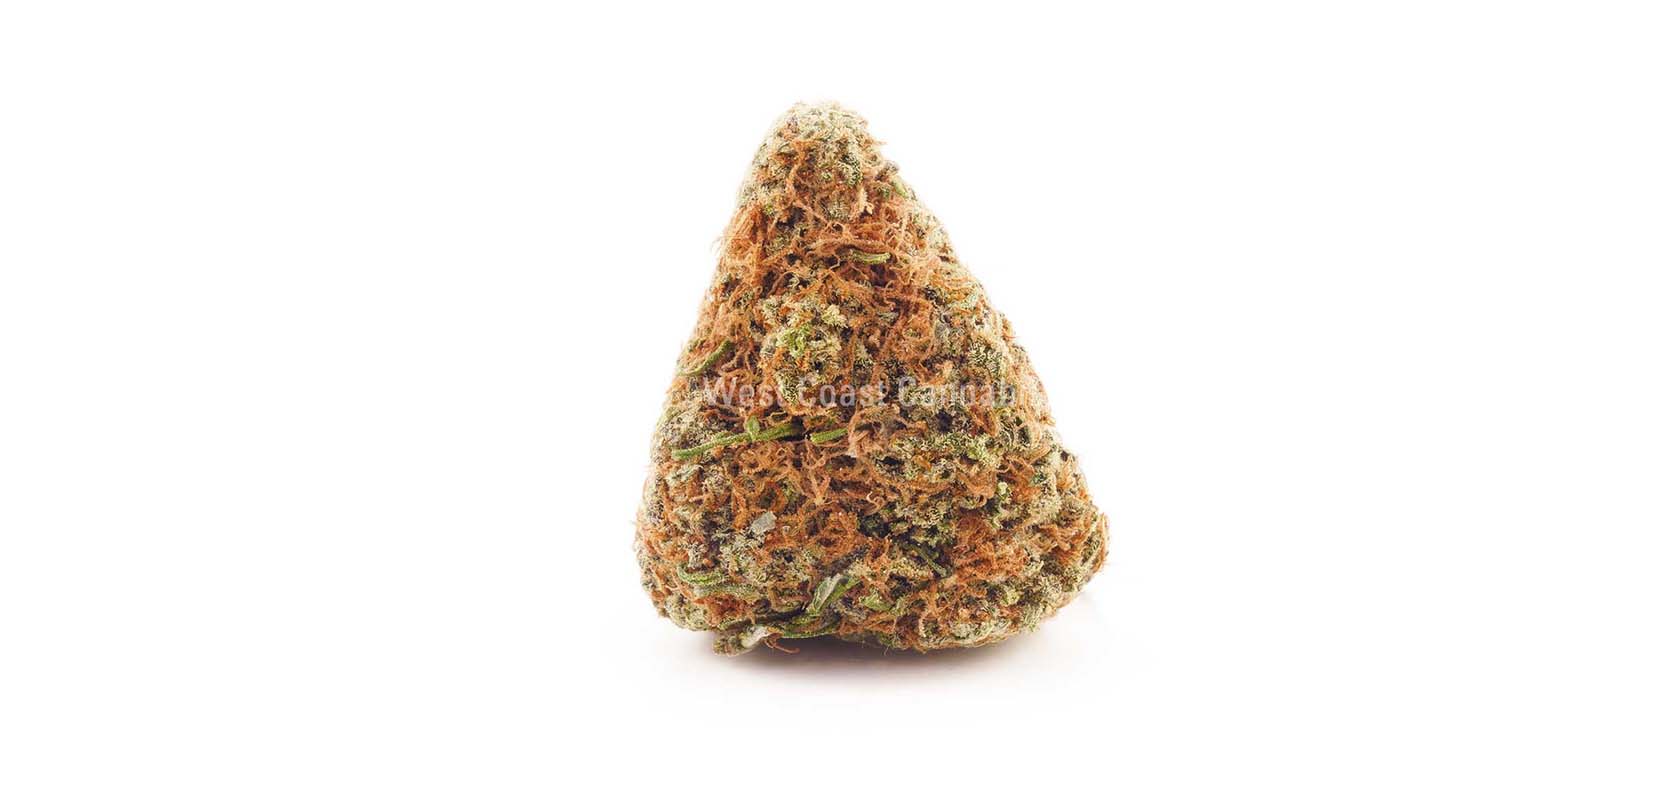 Buy Rainbow Kush weed online Canada at BC cannabis dispensary for budget buds and cheapweed. Buy online weeds. mail order marijuana.